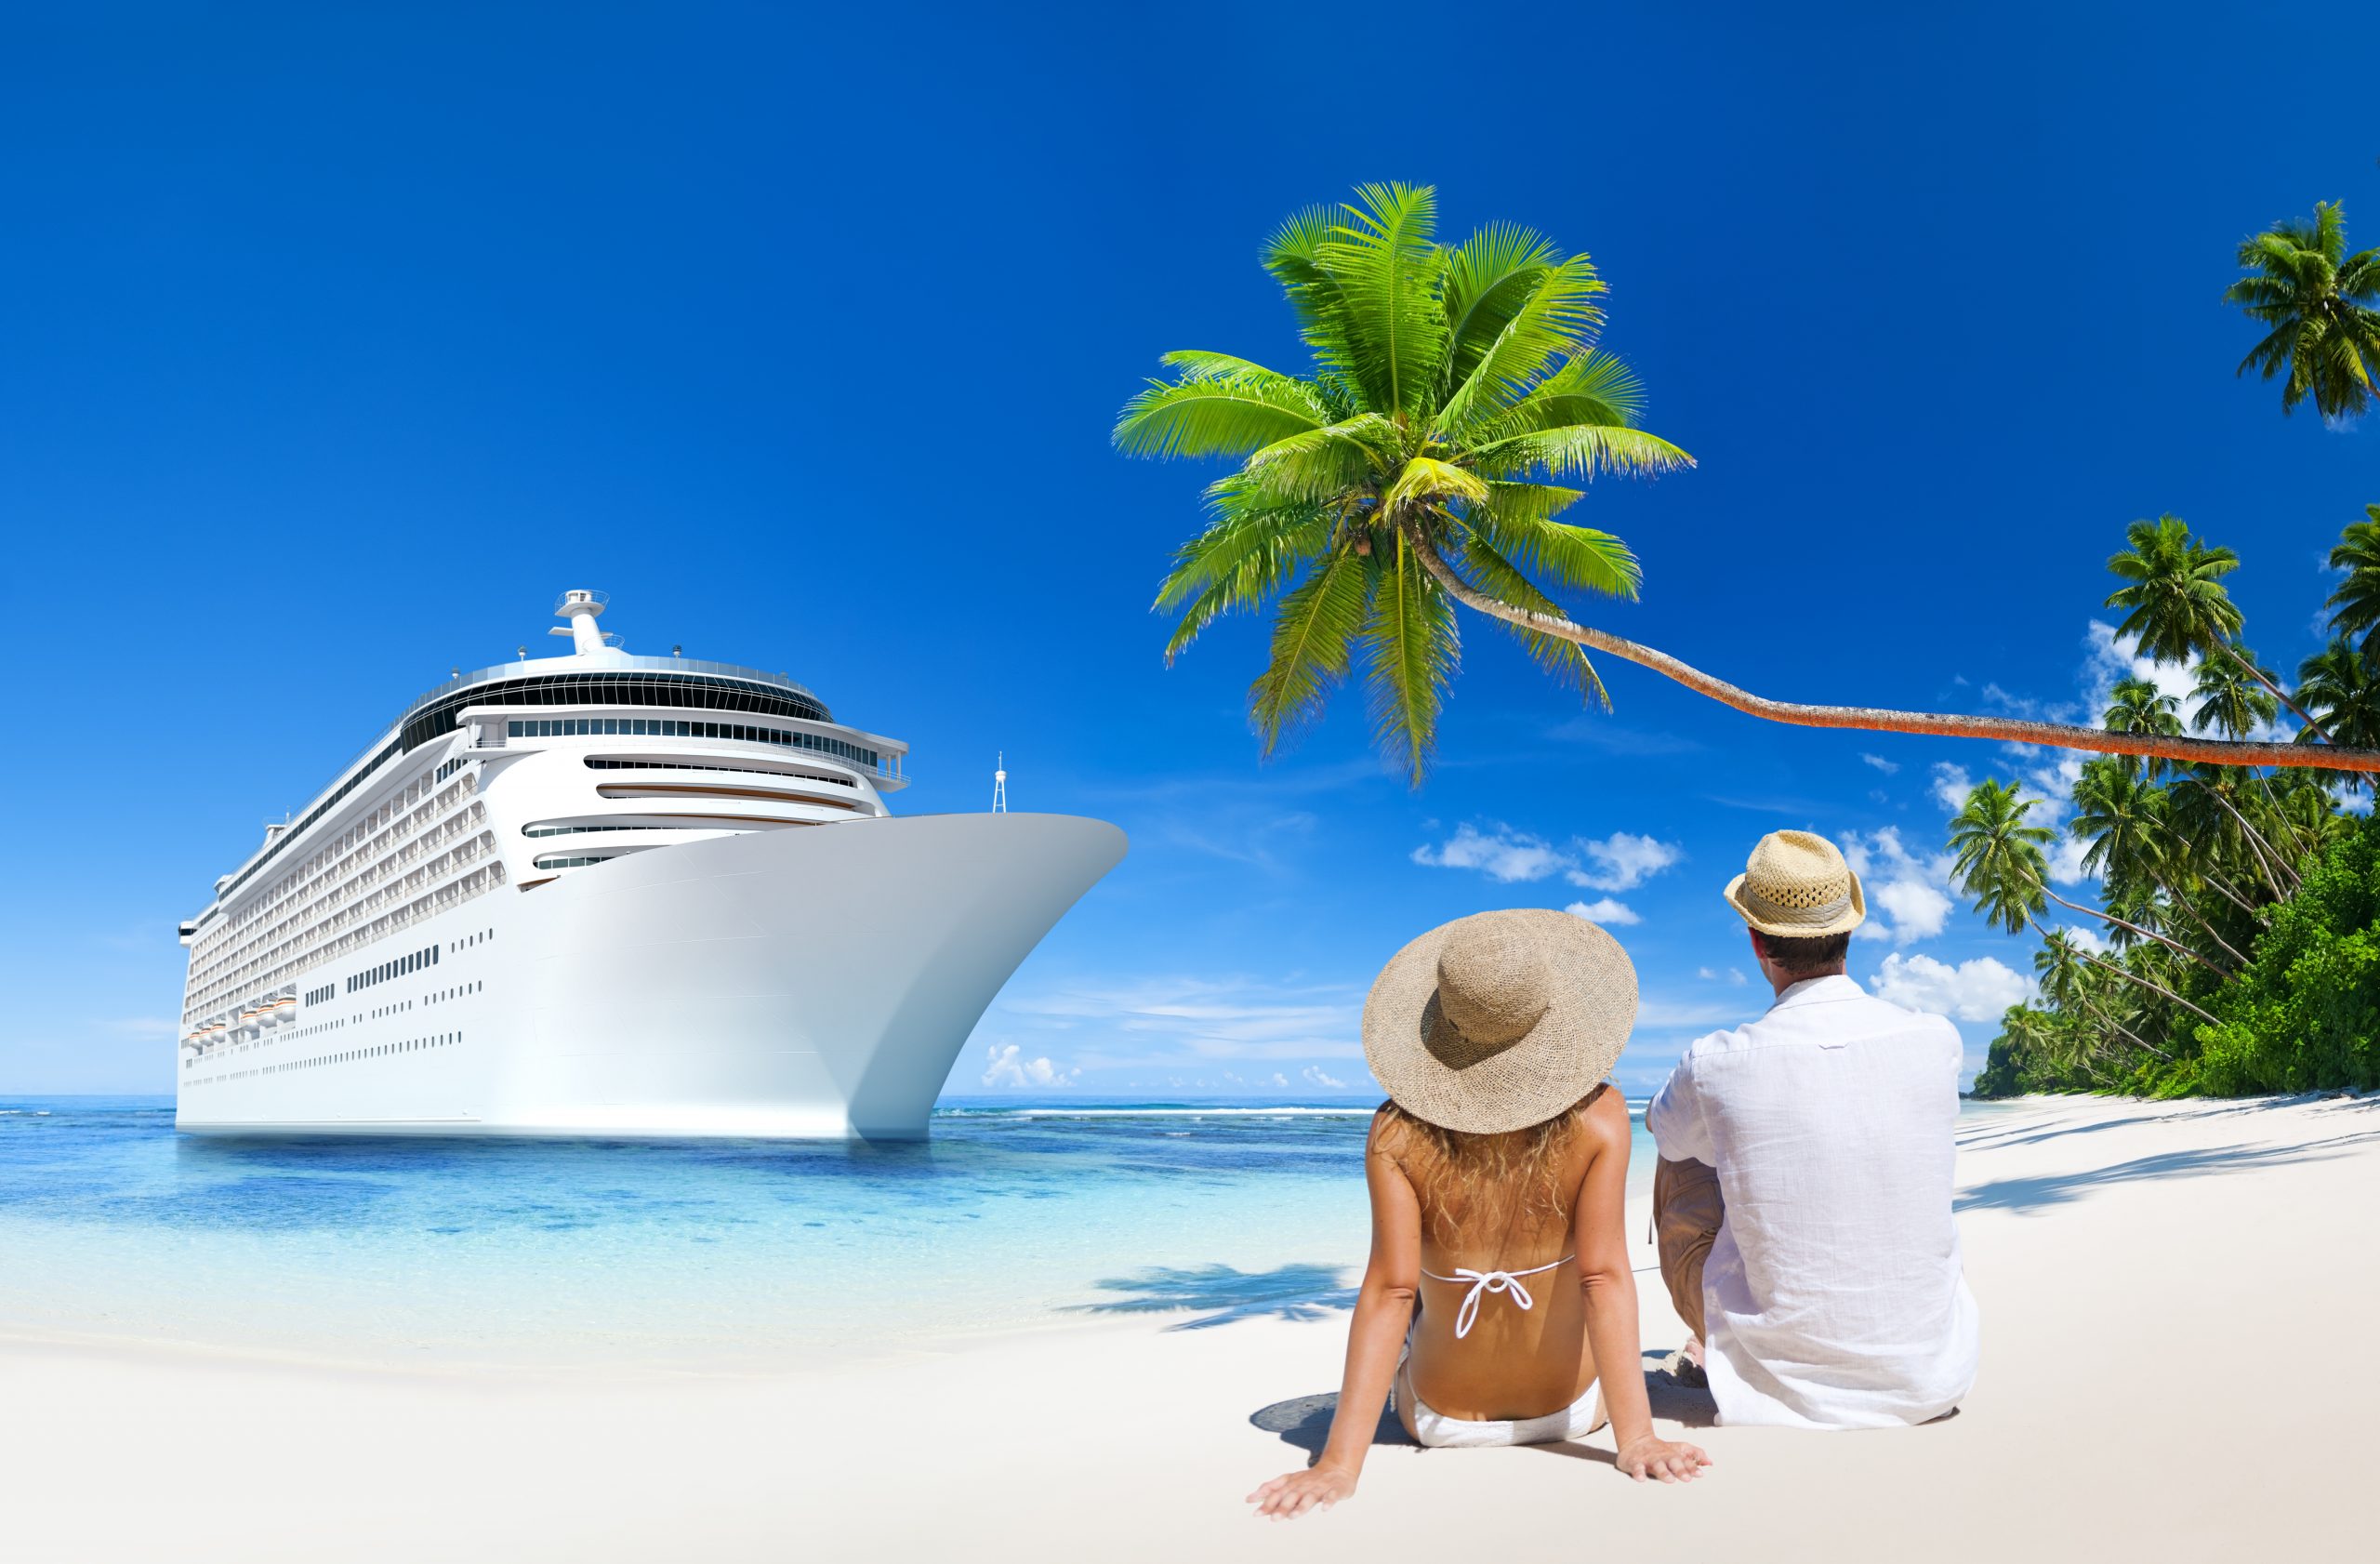 travel insurance for cruise trip